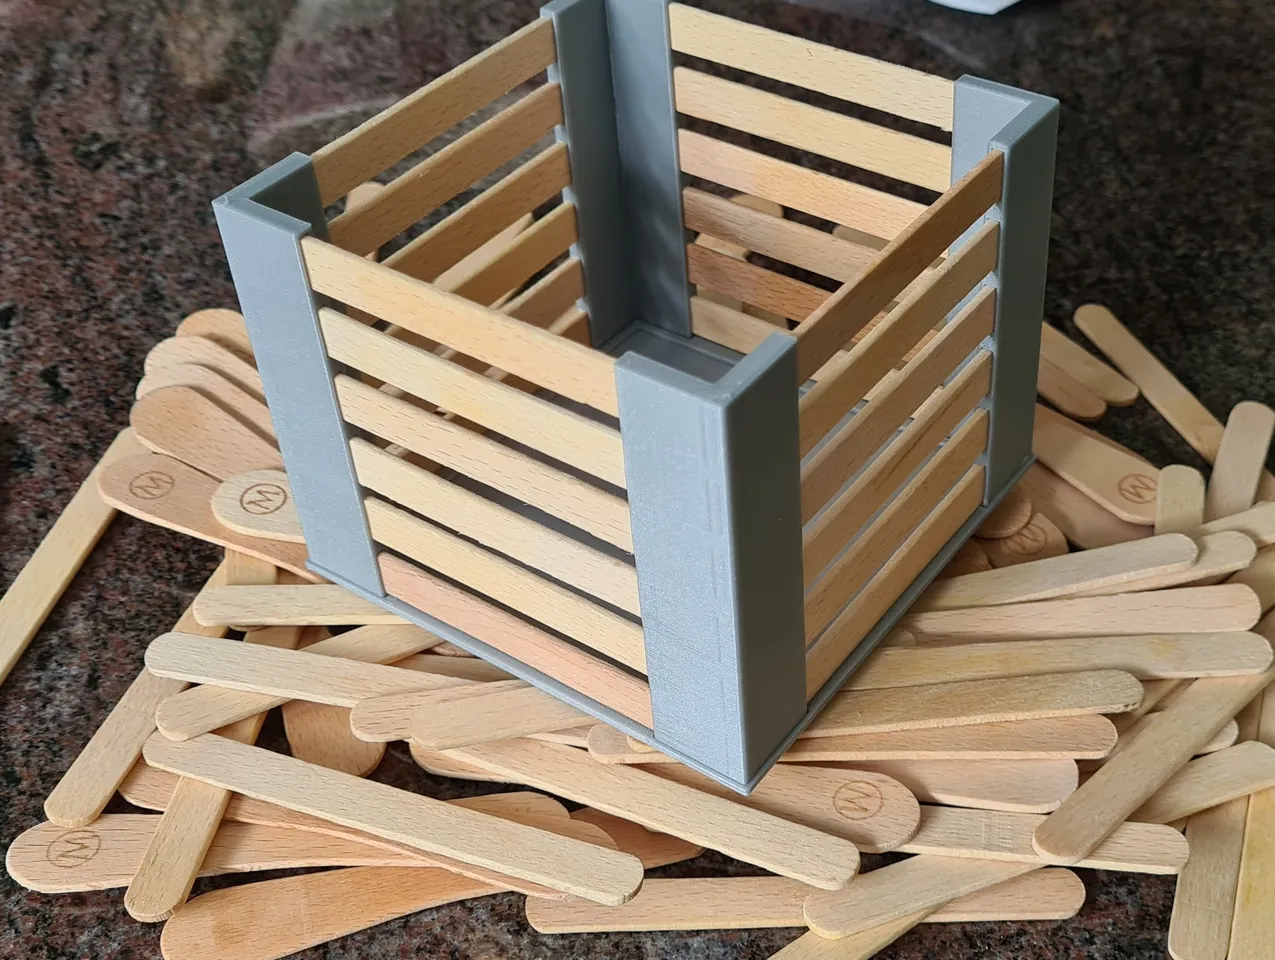 How to Make a Popsicle Stick Crate 